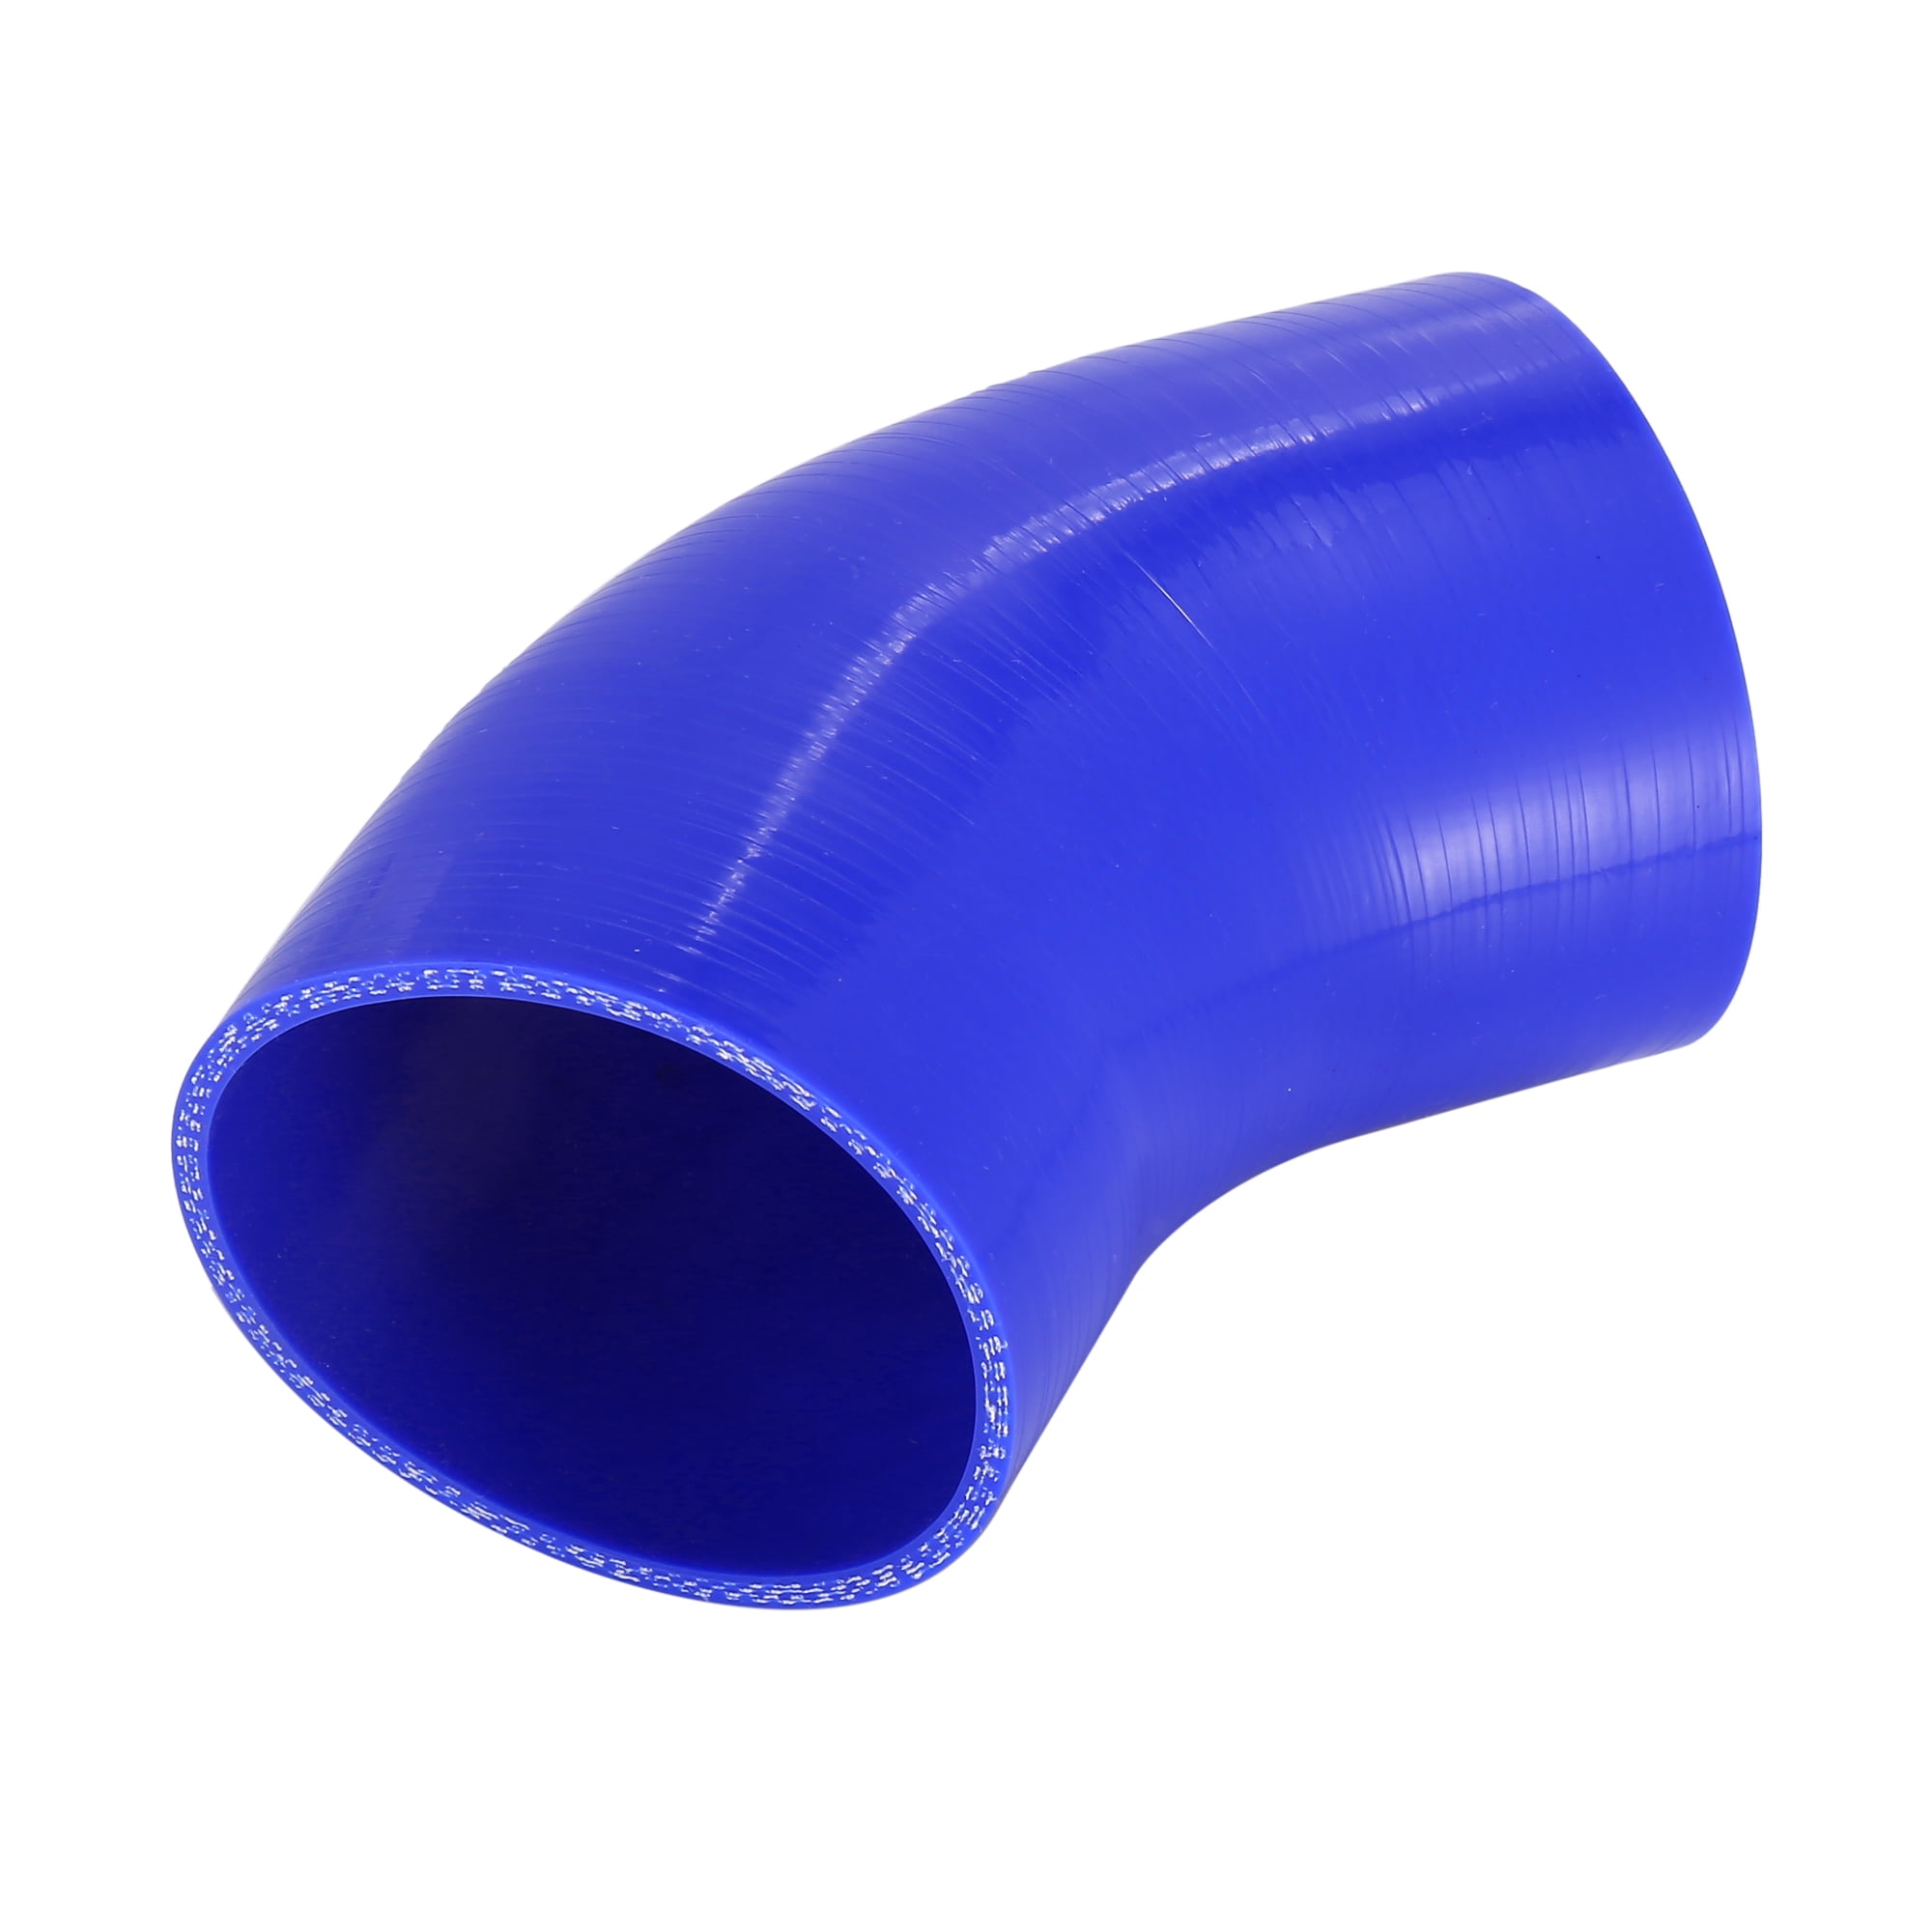 Vehicle 89mm 3.5 ID 45 Degree Elbow Coupler Silicone Hose